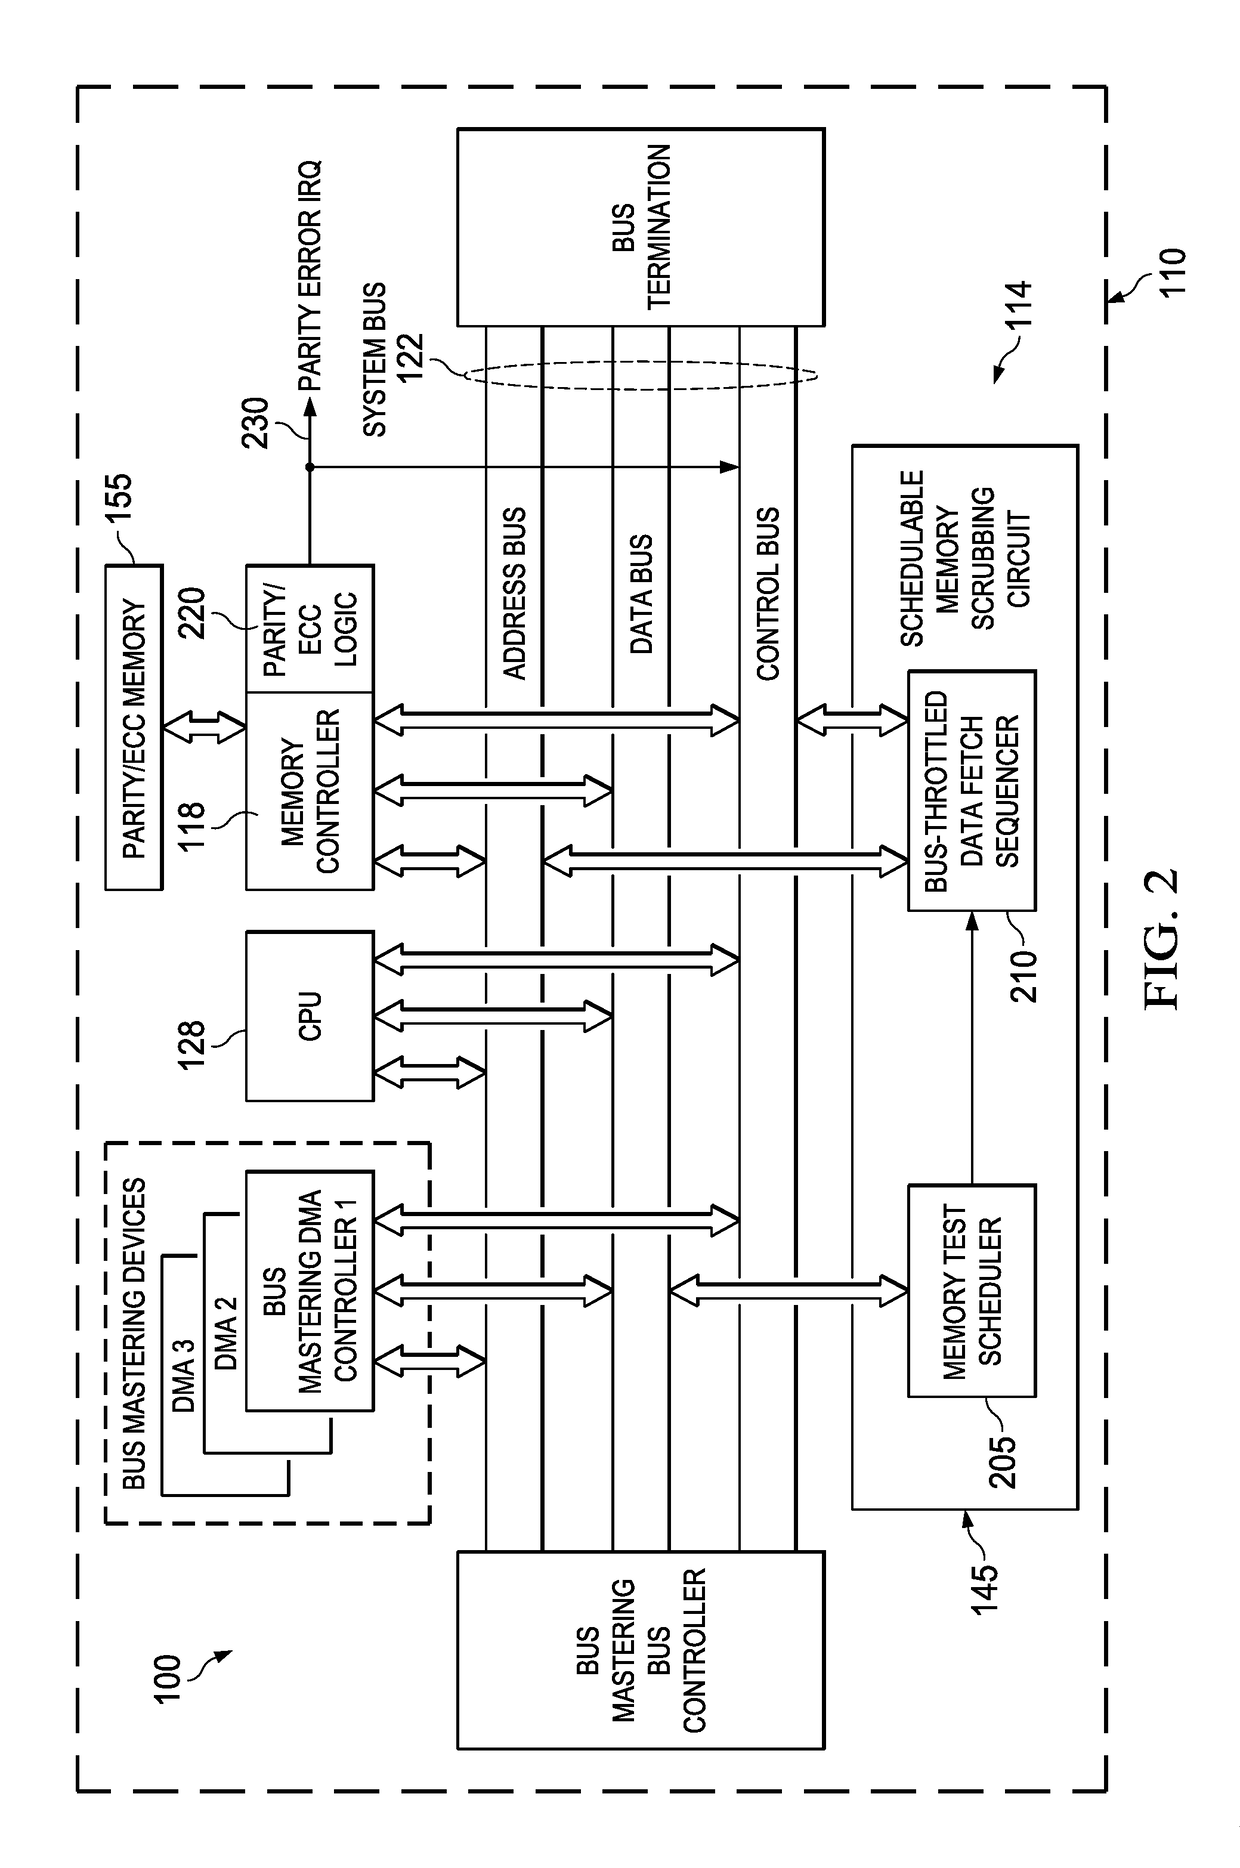 Background memory test apparatus and methods